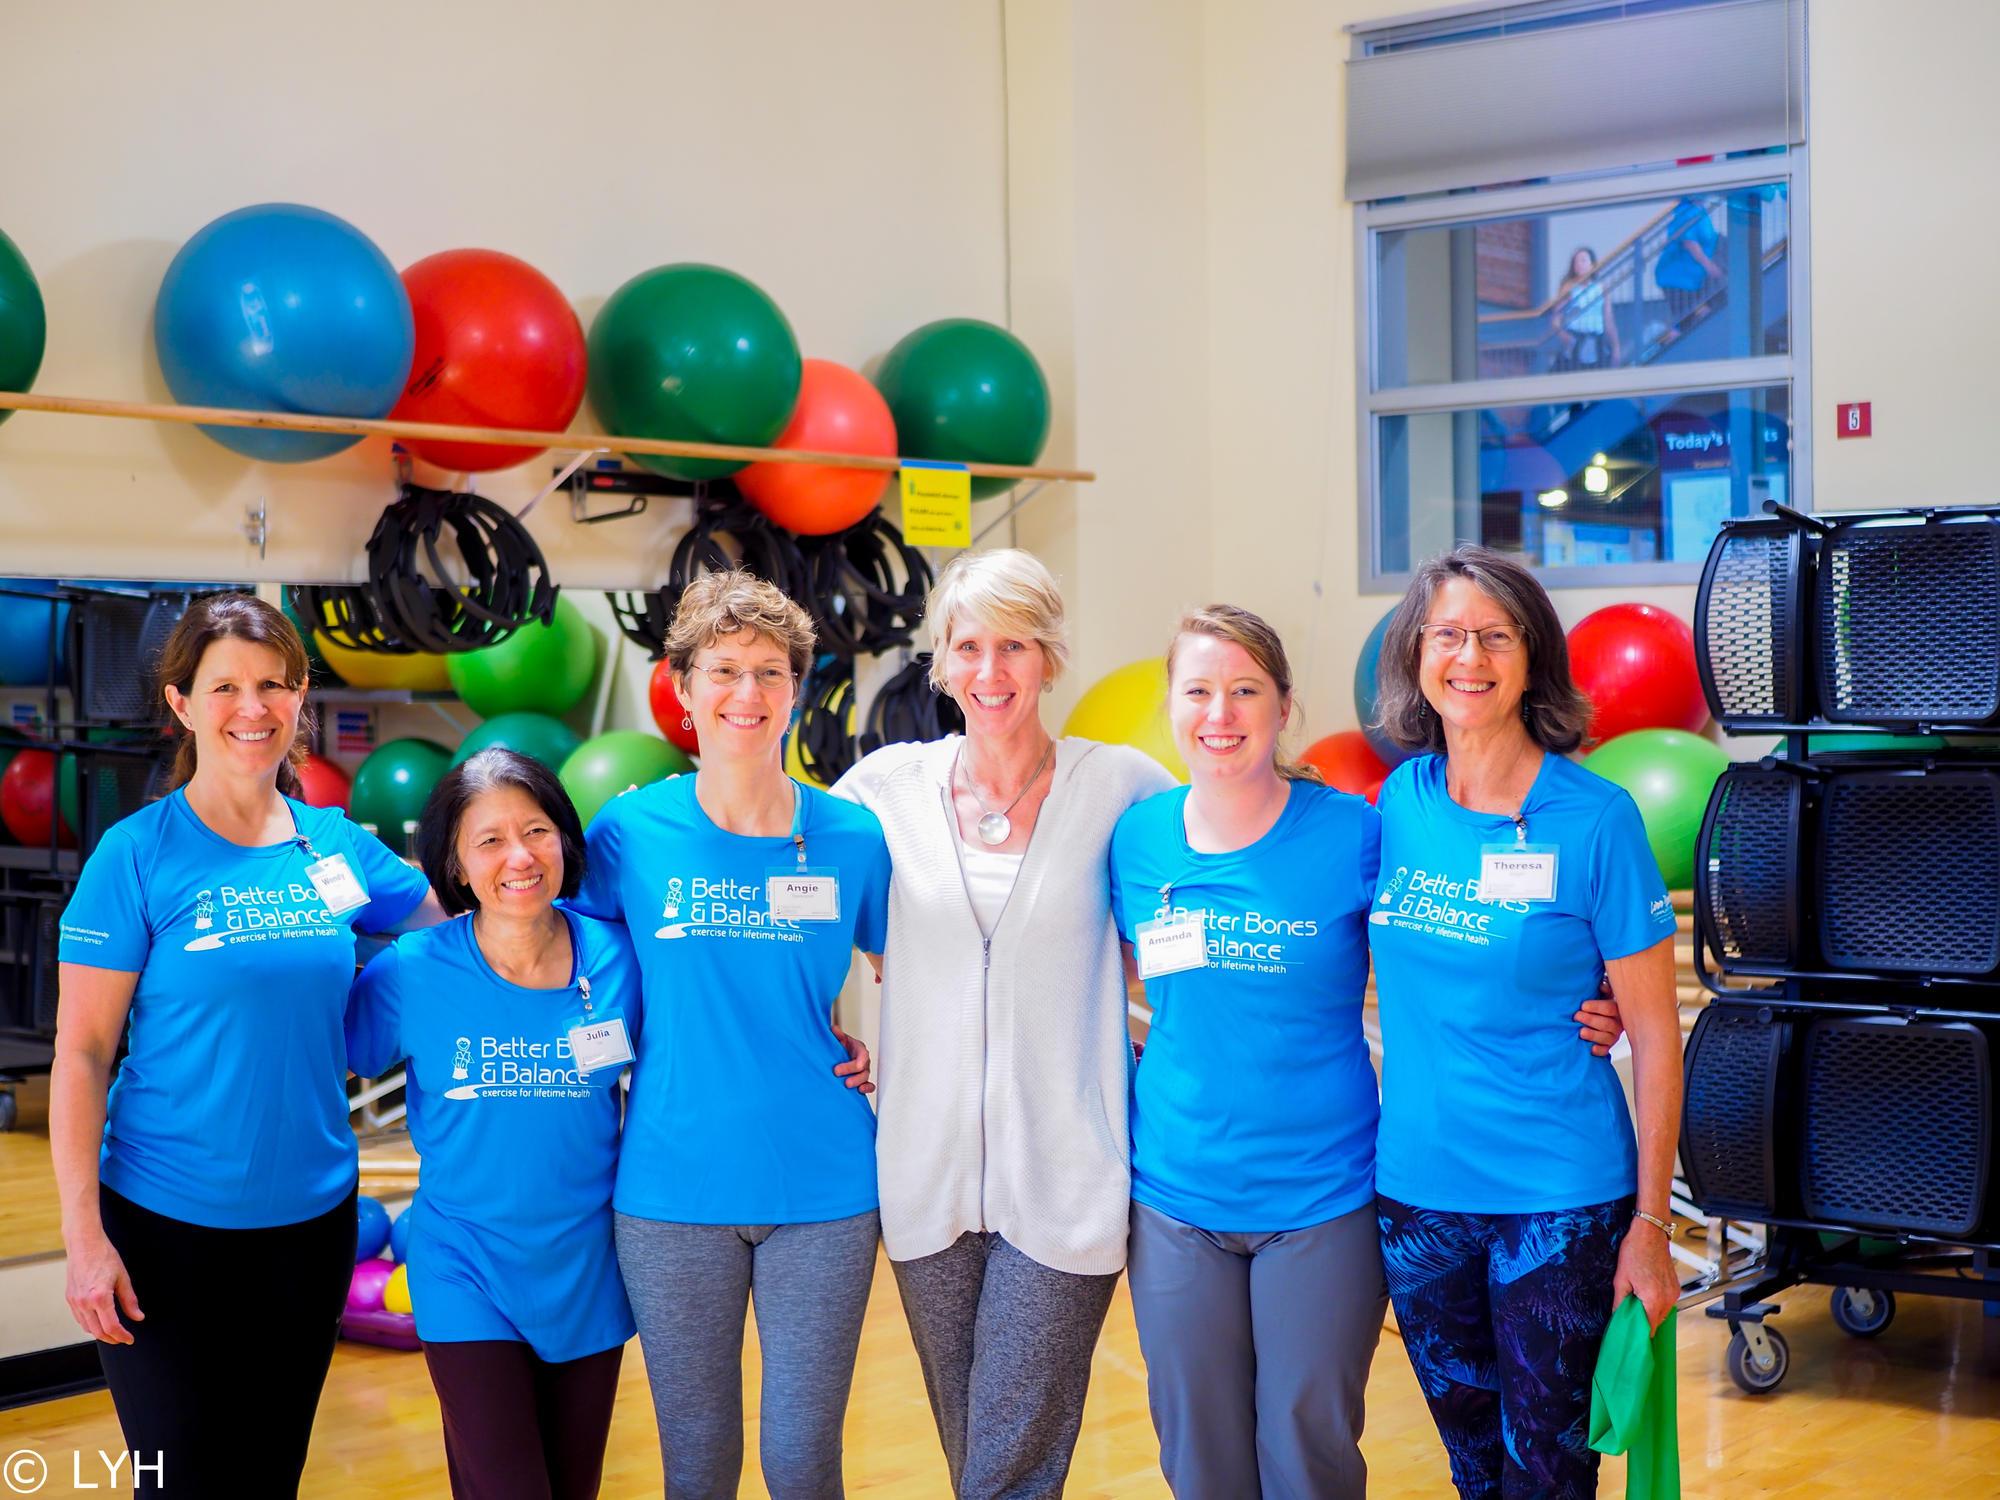 6 women standing together, smiling in a gym